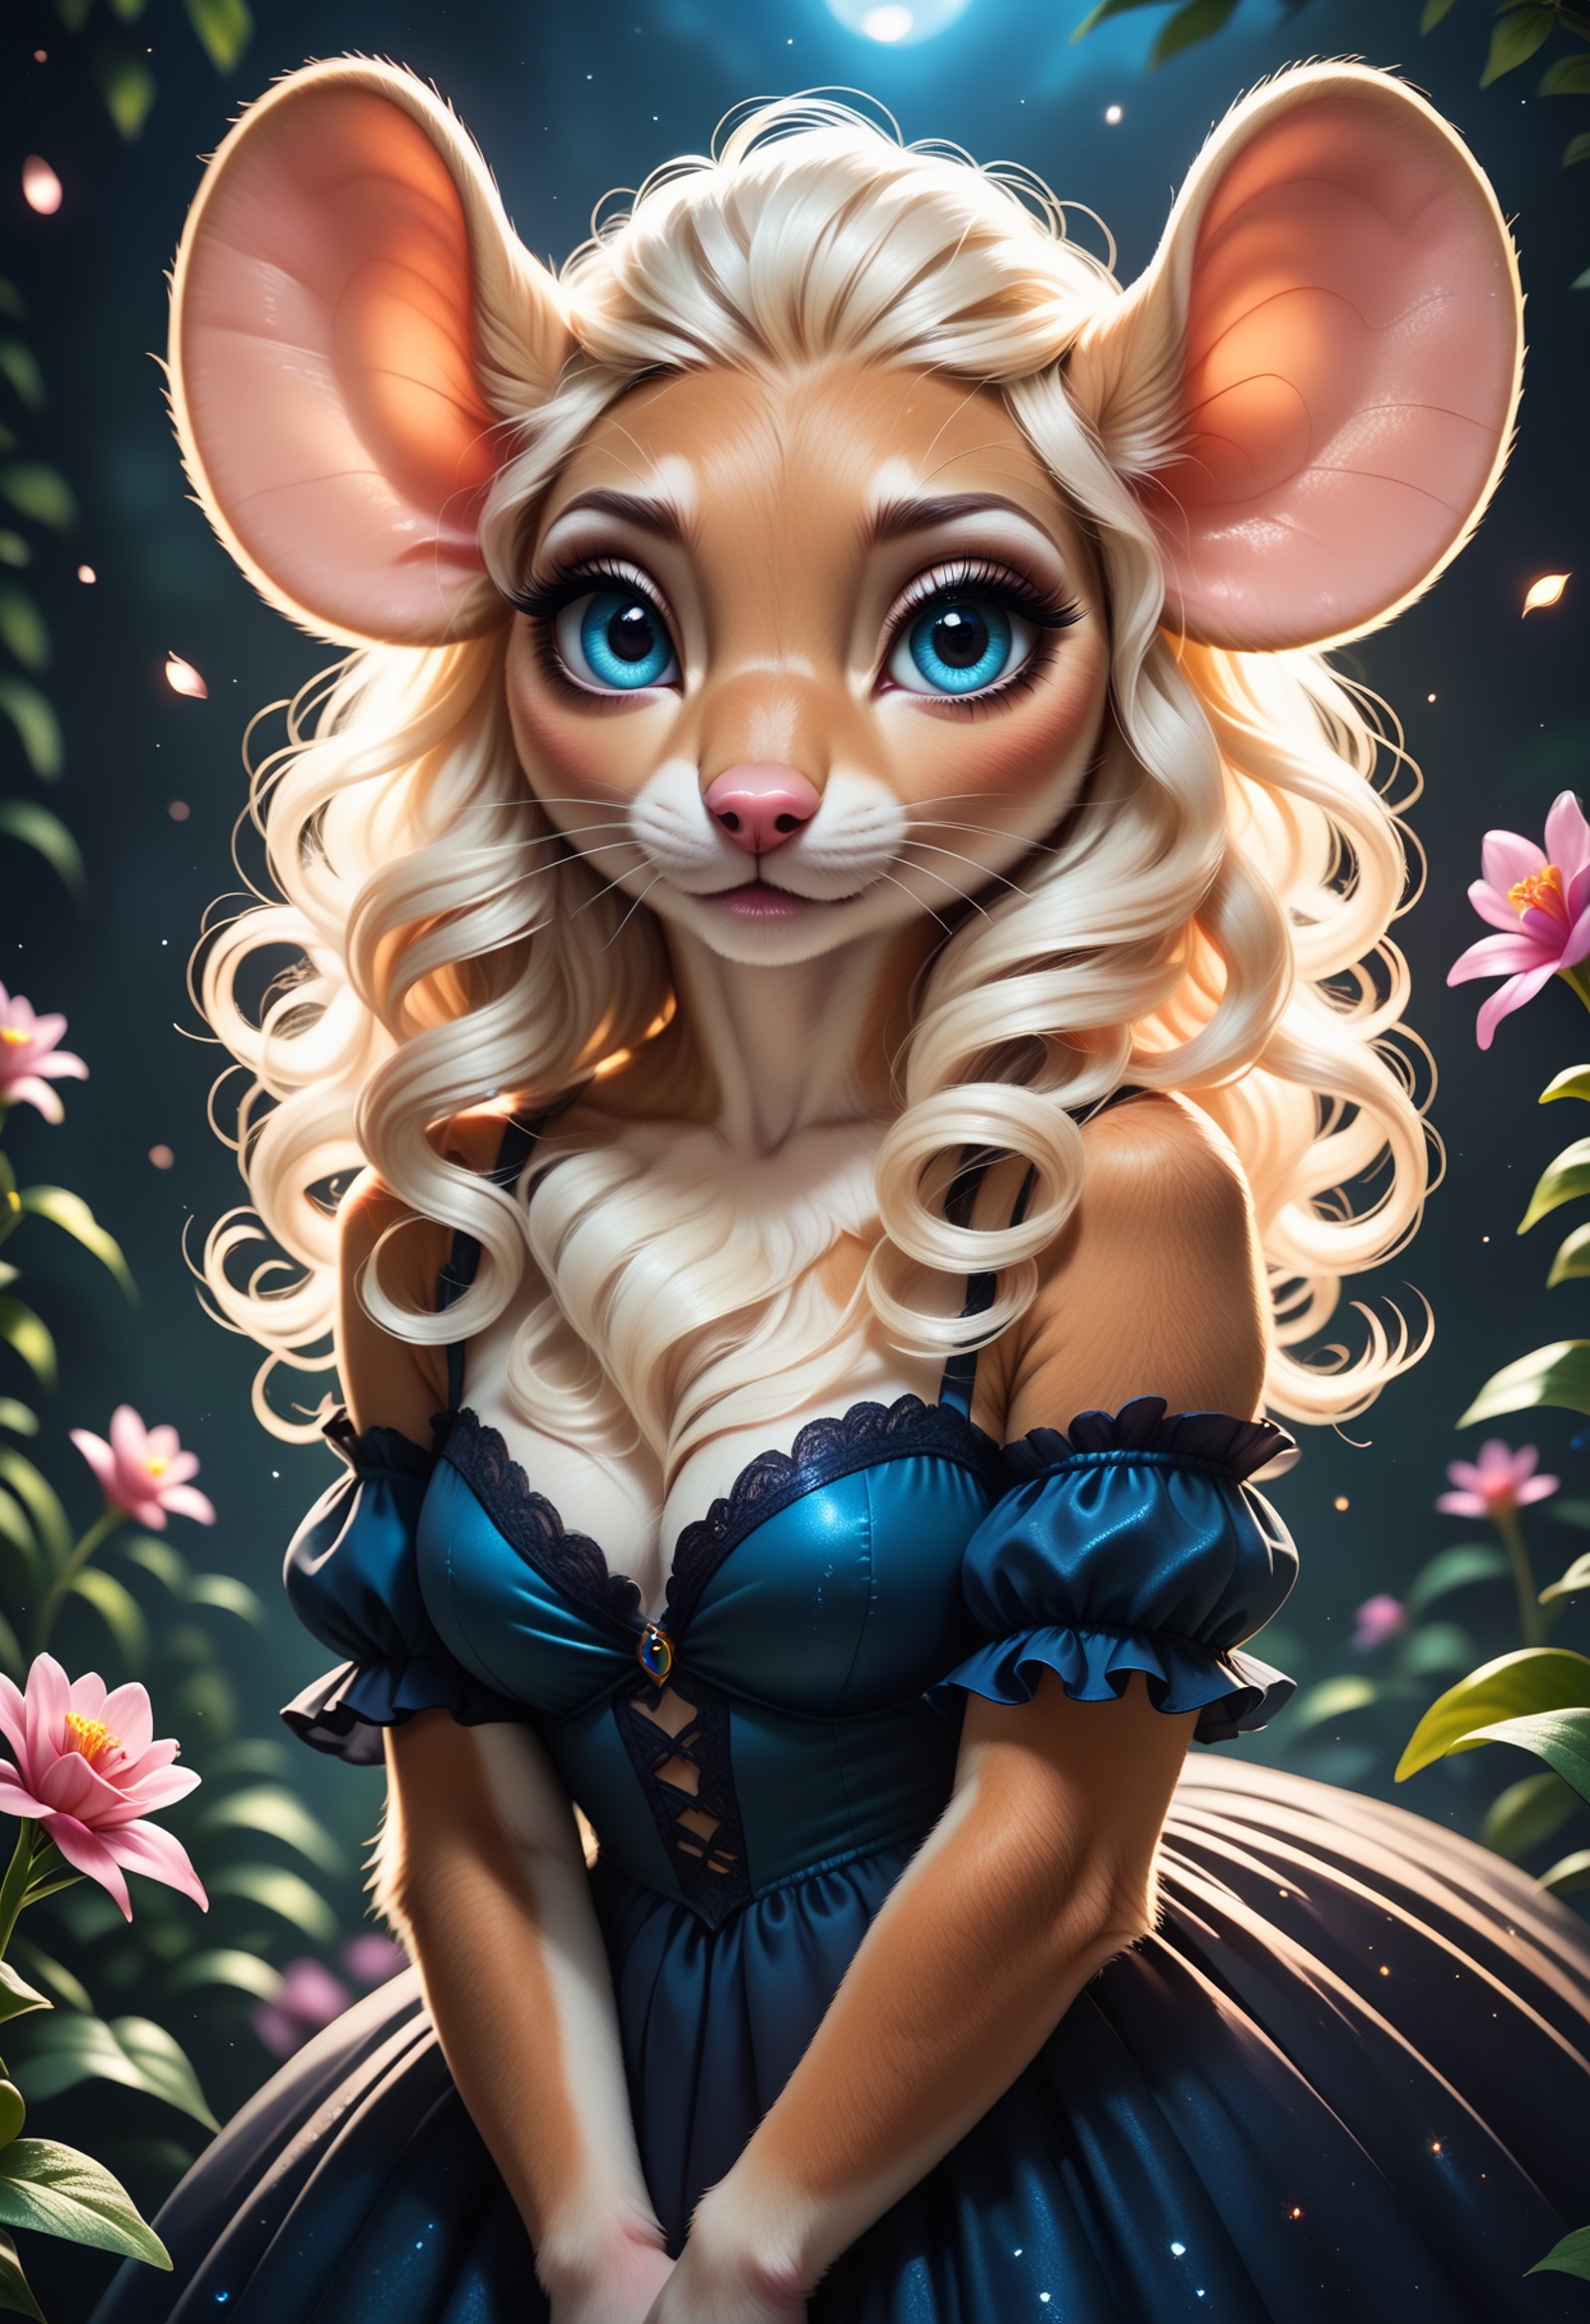 score_9, score_8_up, score_7_up, score_6_up, score_5_up, score_4_up, extremely detailed, furry, beautiful mouse woman, det...